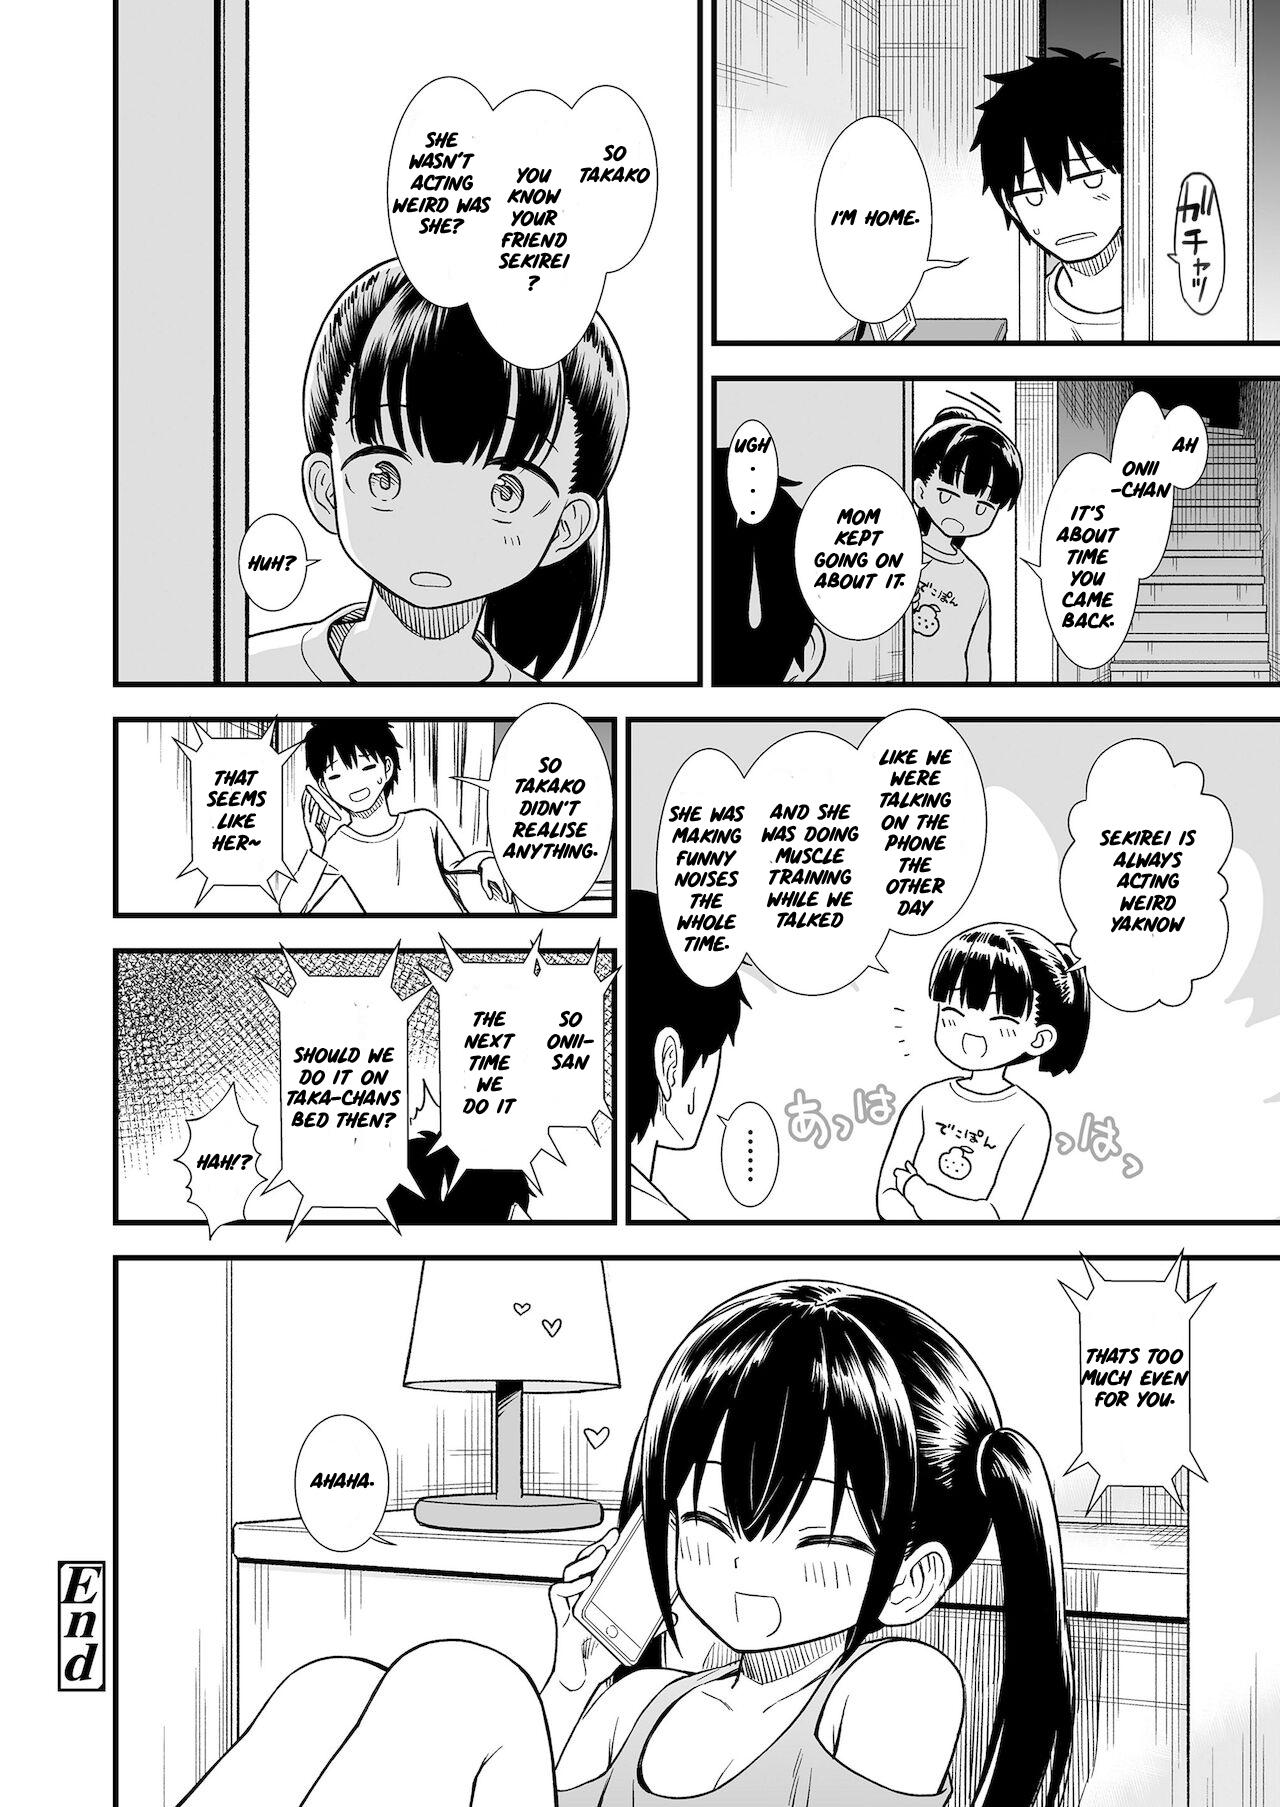 Horny Sluts Imouto no Tomodachi Homecoming | My Little Sister's Friend Homecoming Exposed - Page 24